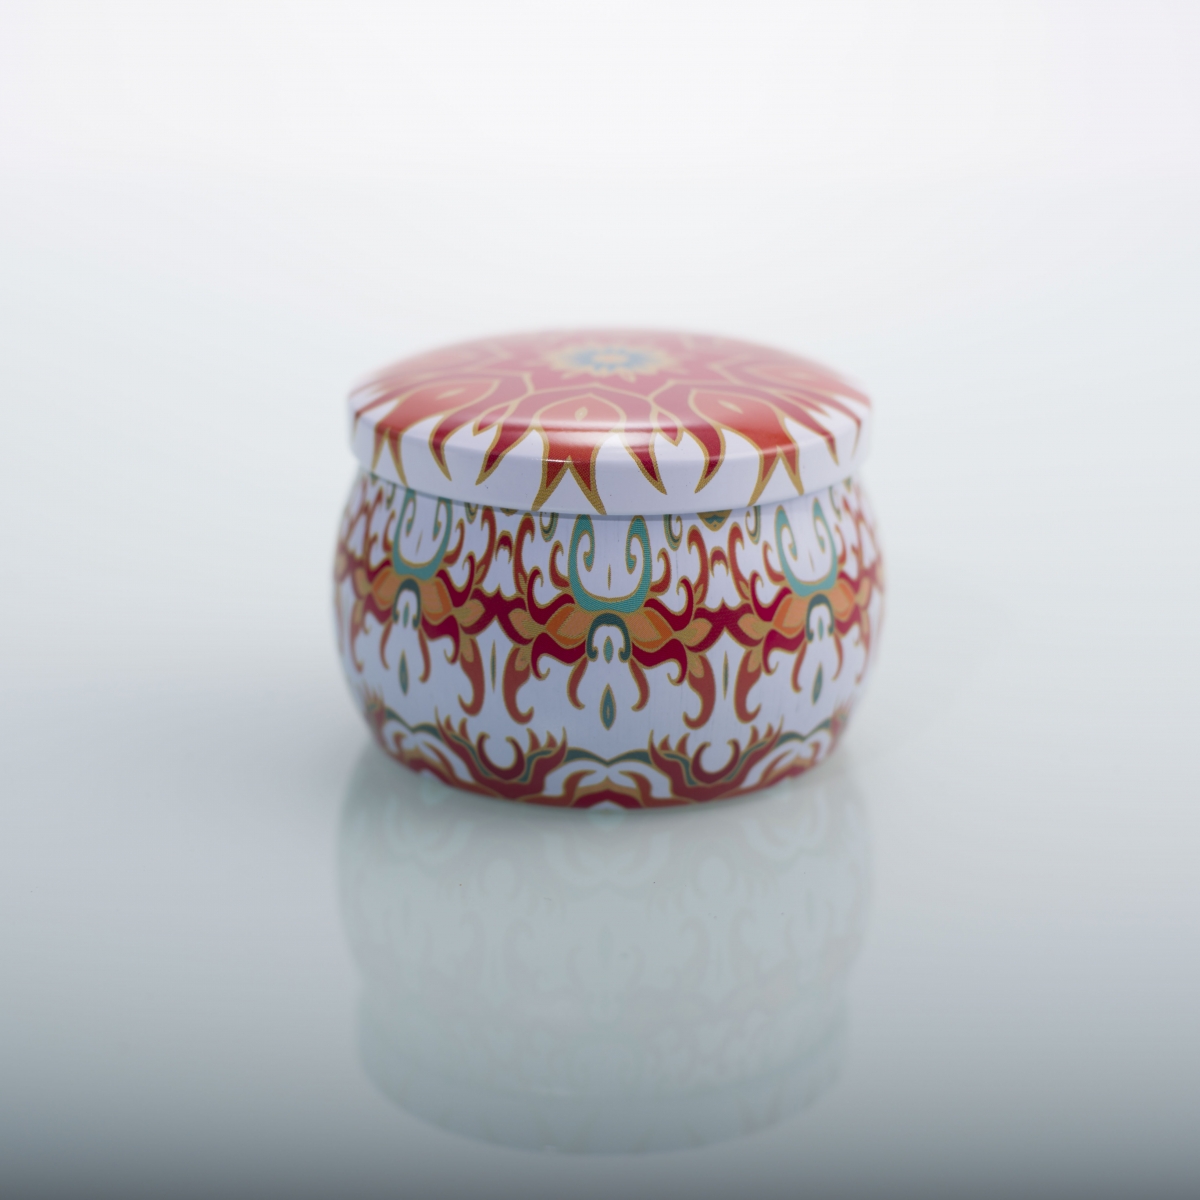 Tin Candles：Fragranced Soy Candle, Bvlgari Omnia Coral, Travel Candles, China Factory, Price-HOWCANDLE-Candles,Scented Candles,Aromatherapy Candles,Soy Candles,Vegan Candles,Jar Candles,Pillar Candles,Candle Gift Sets,Essential Oils,Reed Diffuser,Candle Holder,